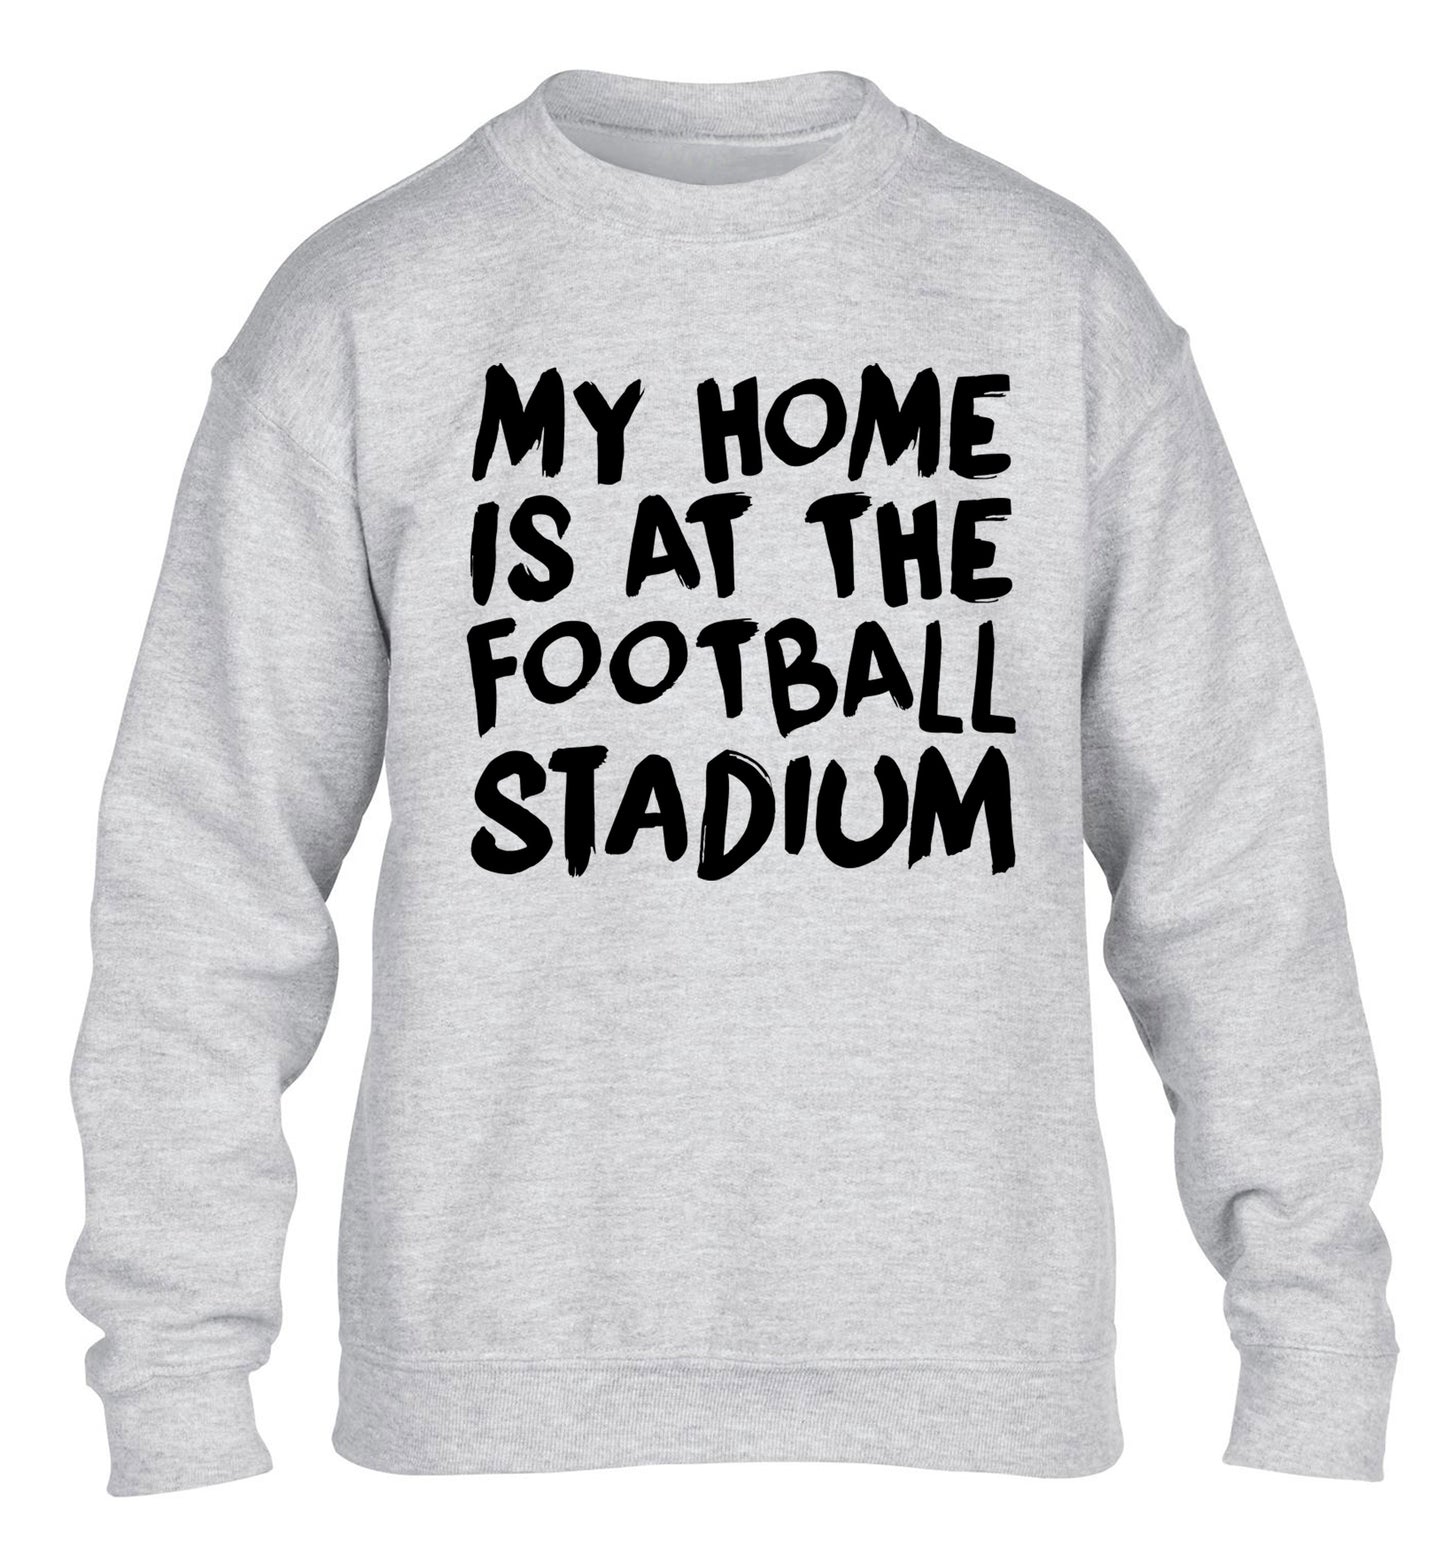 My home is at the football stadium children's grey sweater 12-14 Years